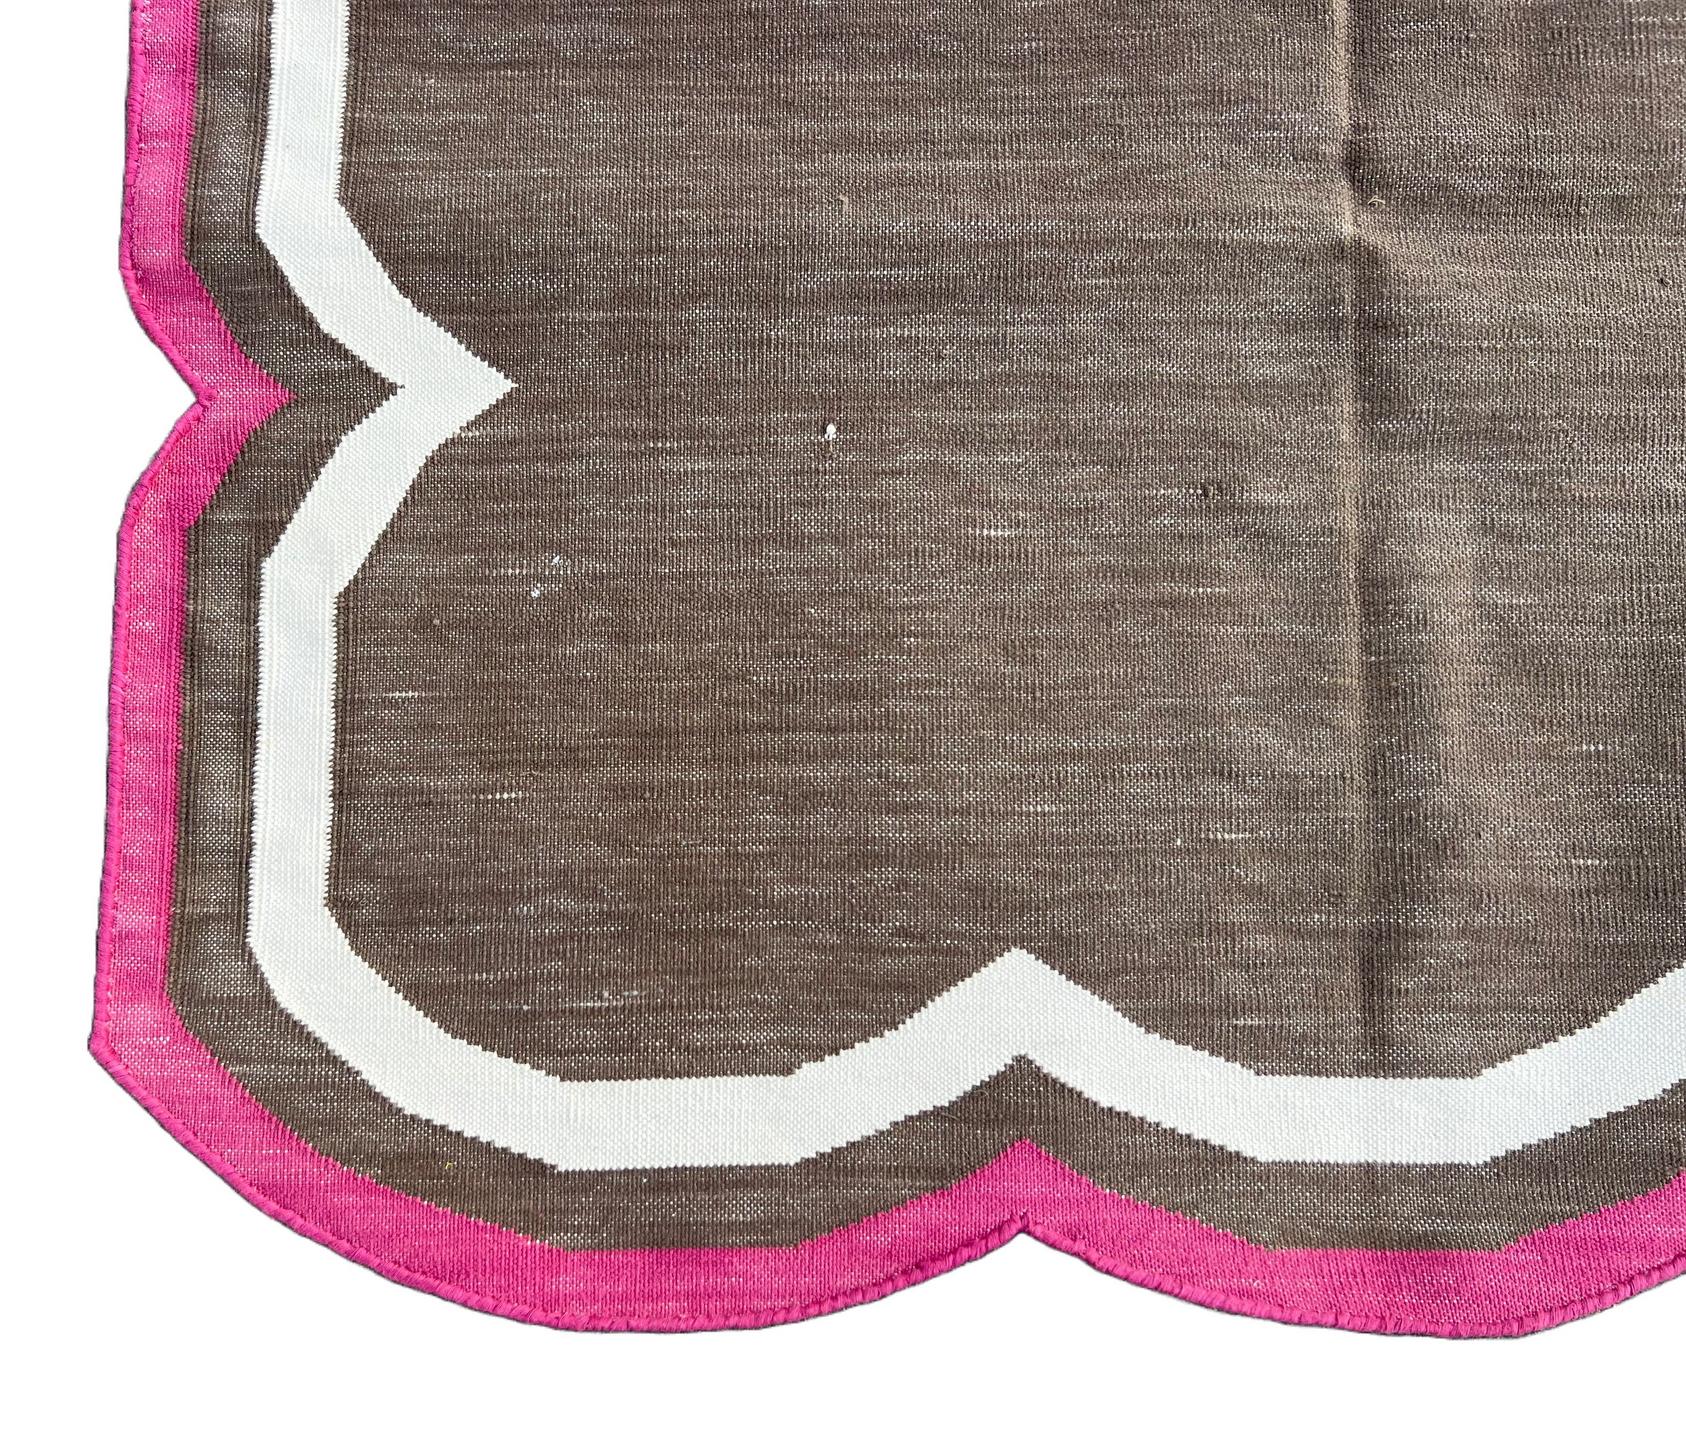 Contemporary Handmade Cotton Area Flat Weave Rug, 3x5 Brown And Pink Scalloped Kilim Dhurrie For Sale